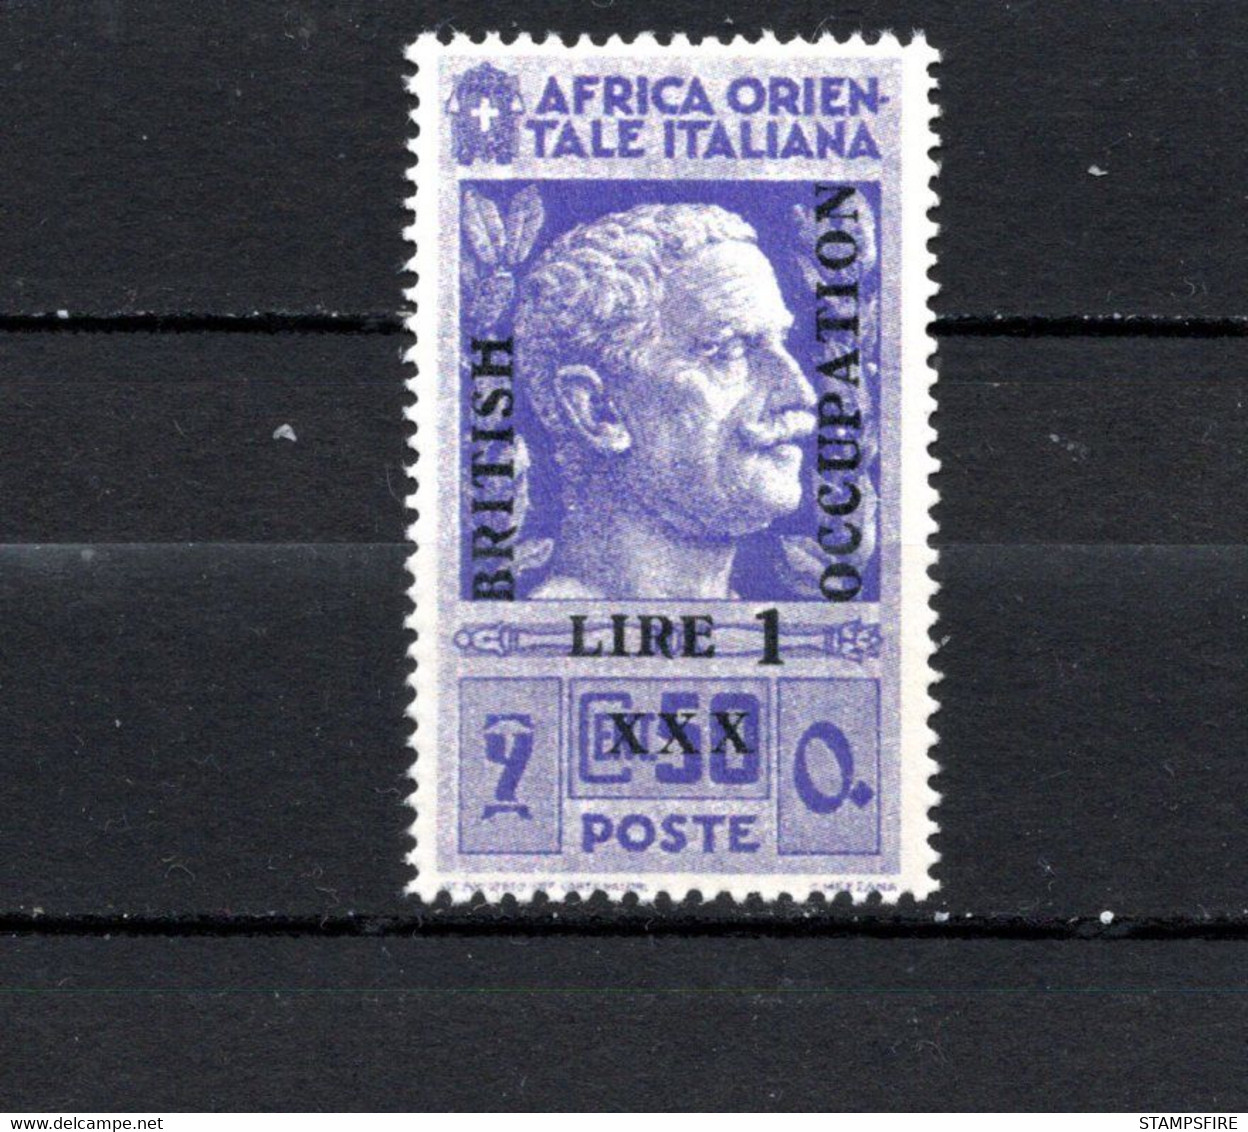 British Occupation Italy  Unissued 1941  Africa RARE MNH - Afrique Orientale